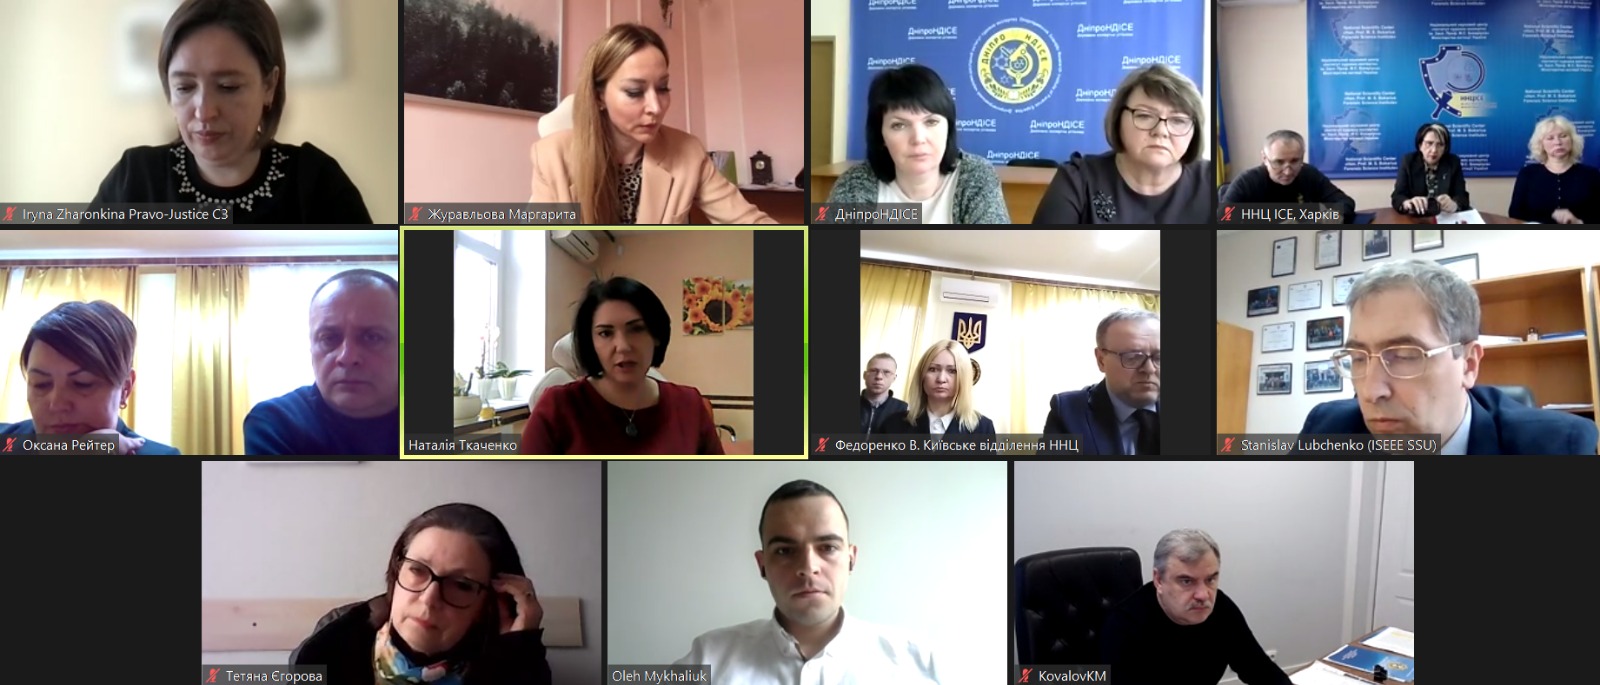 EU Project Pravo-Justice Held the Round Table on Finding Ways to Improve Forensics Activity in Ukraine